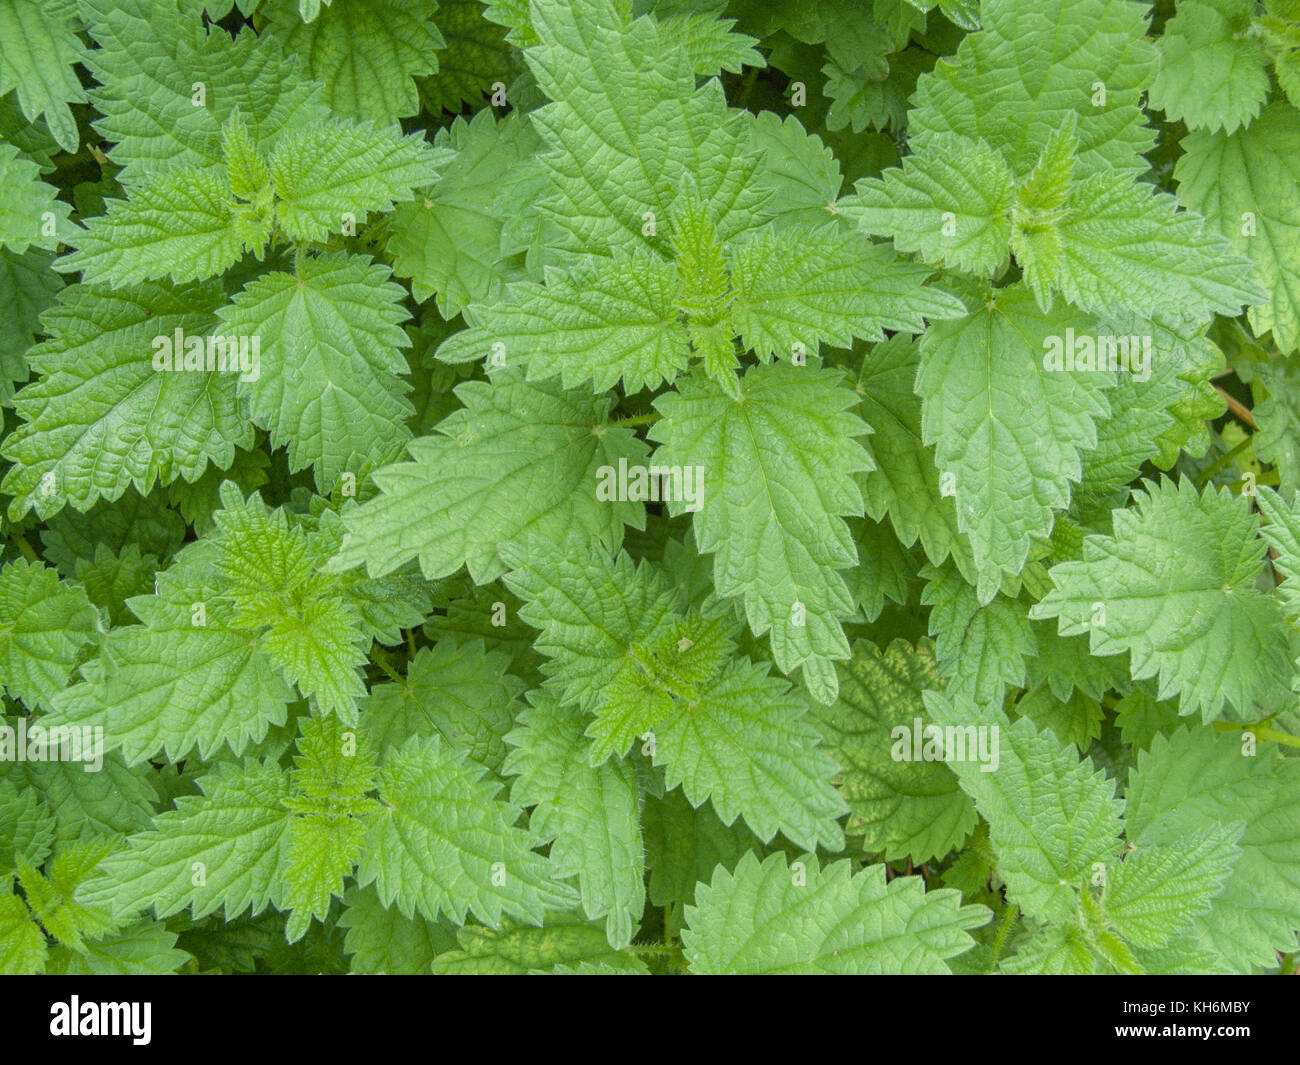 Common Stinging Nettle / Urtica dioica. Used as foraged wild vegetable green once cooked, also used in herbal medicines. Painful sting, bed of nettles Stock Photo